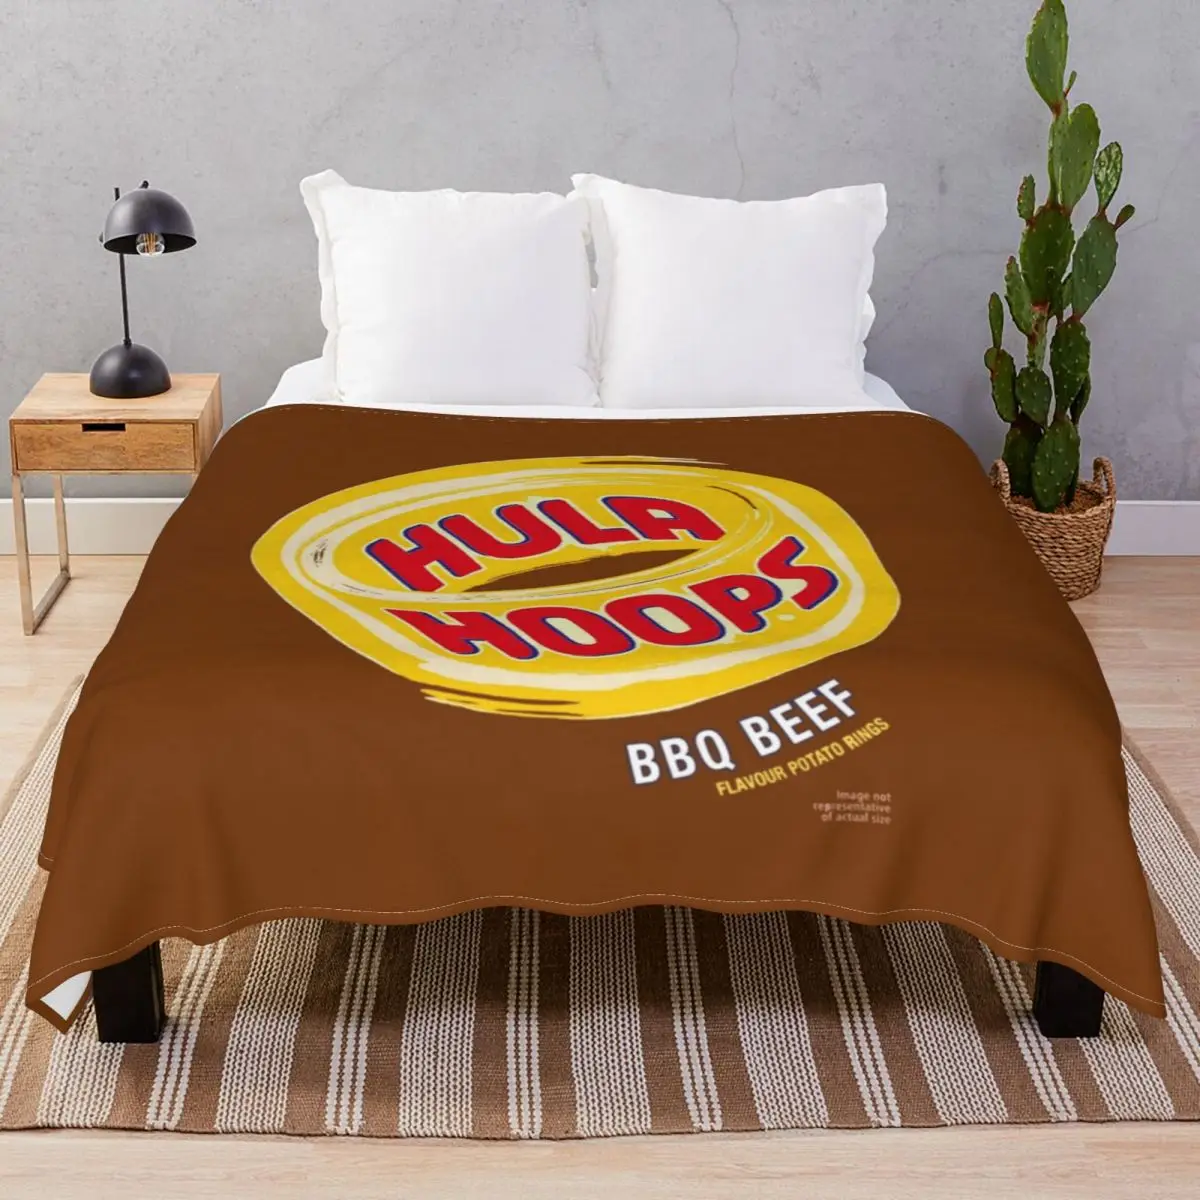 Hula Hoops BBQ Beef Crisps Blankets Fleece Plush Print Ultra-Soft Throw Blanket for Bedding Home Couch Travel Office